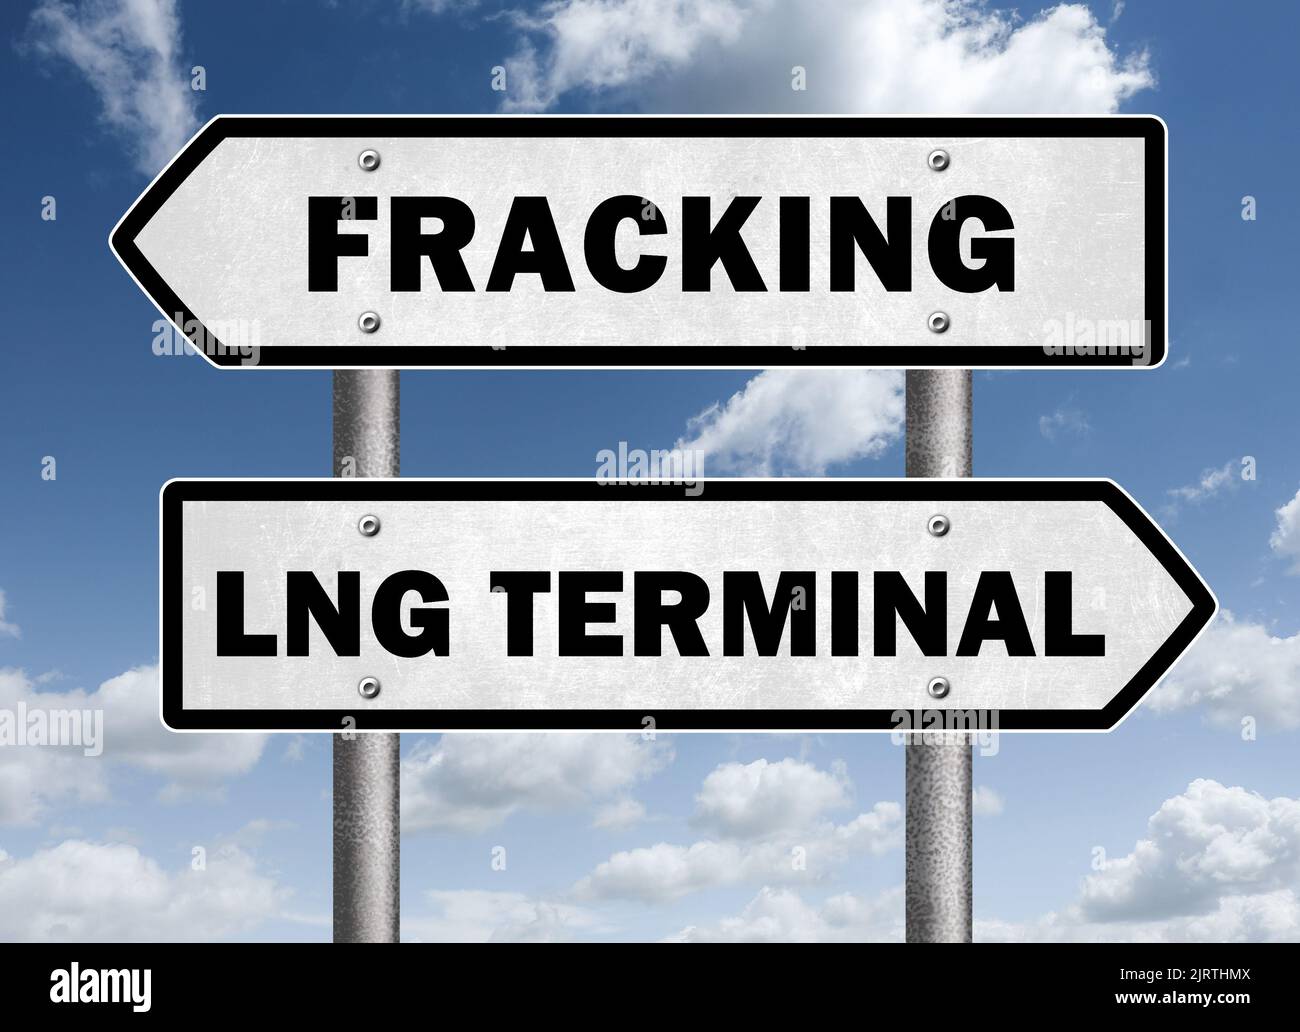 Hydraulic Fracturing to Liquefied natural gas terminal Stock Photo